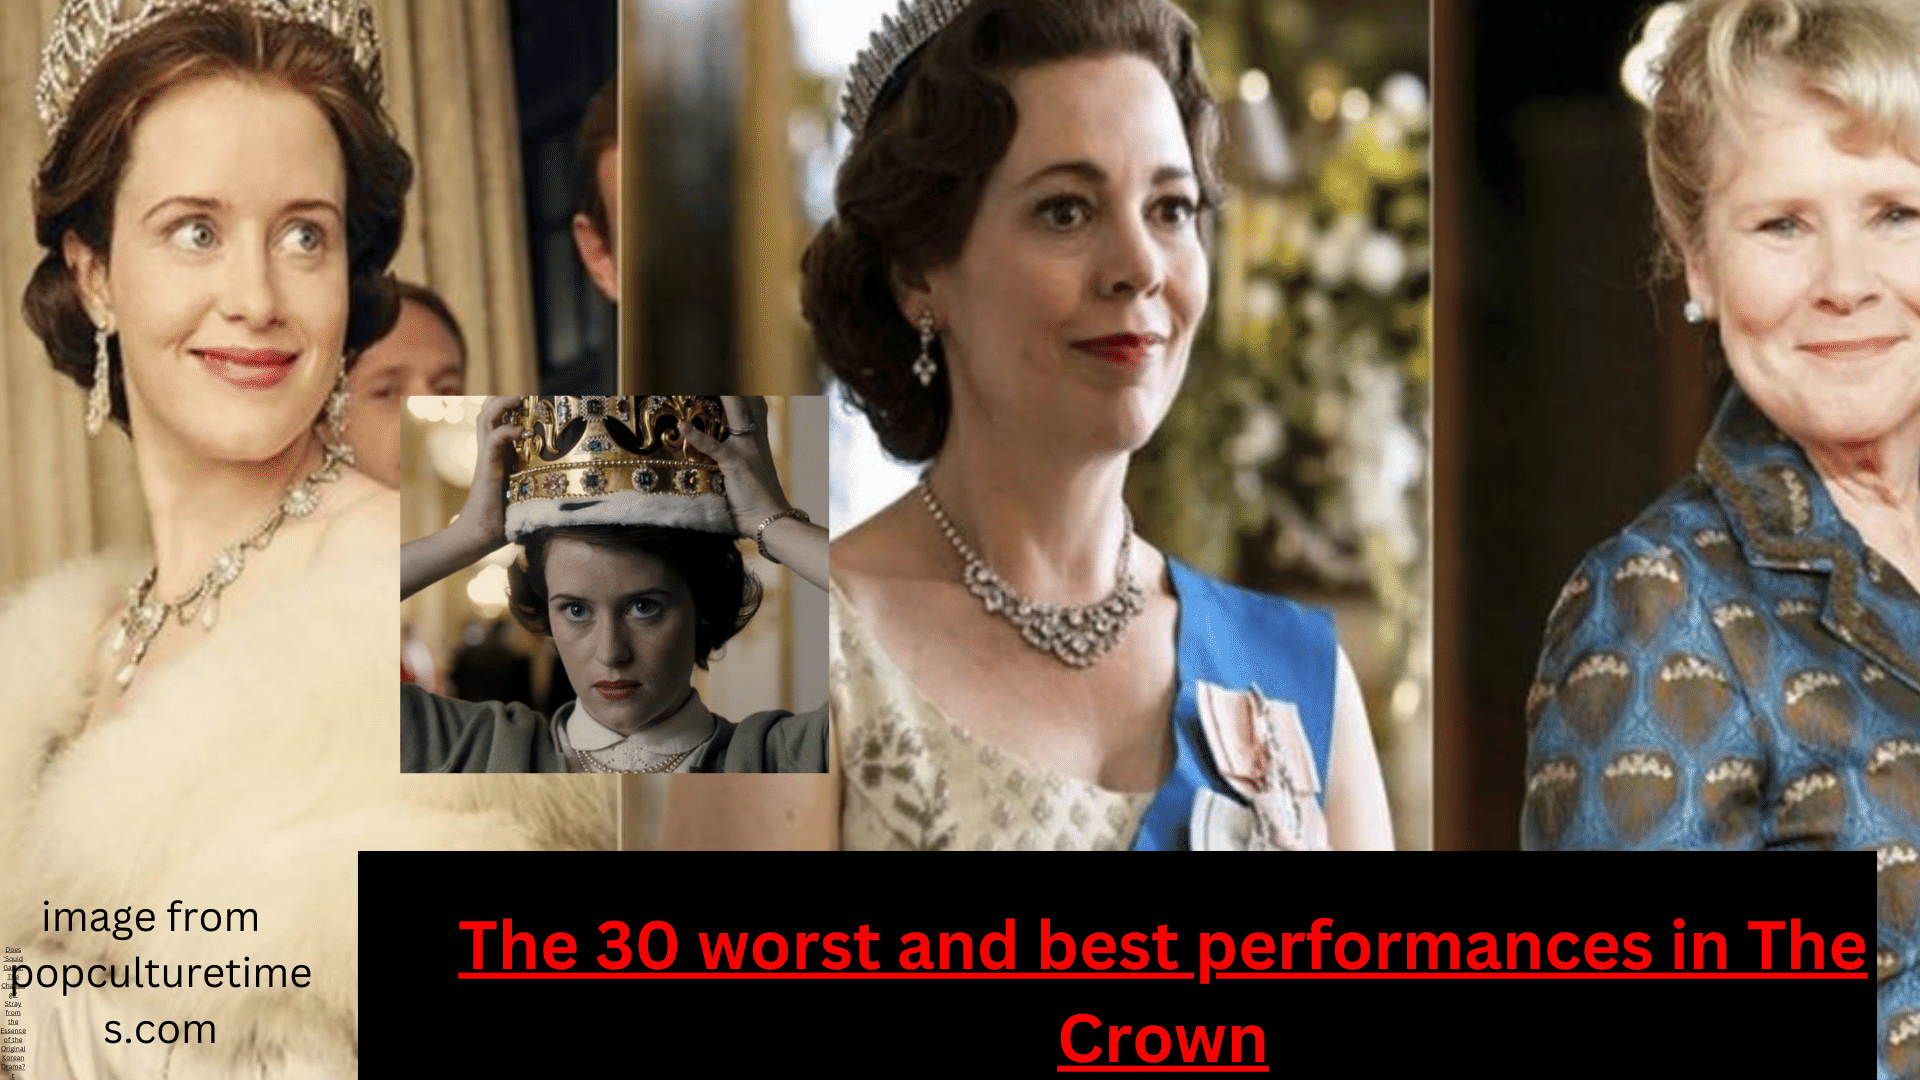 The 30 worst and best performances in The Crown